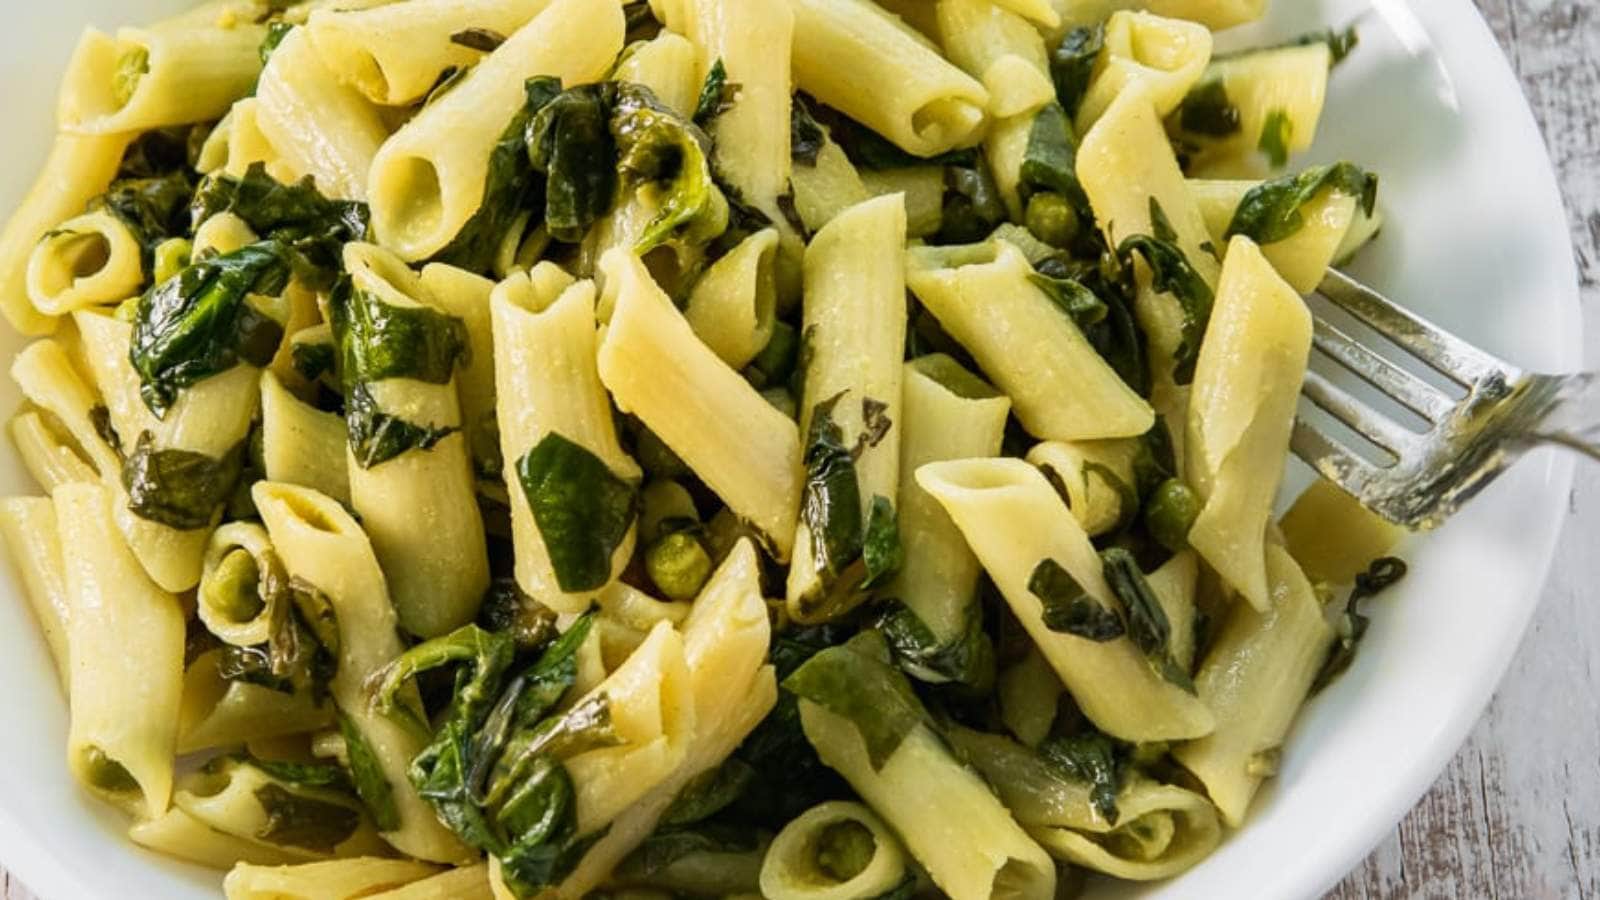 Spinach And Peas One Pot Pasta recipe by Bee Of The Wild.